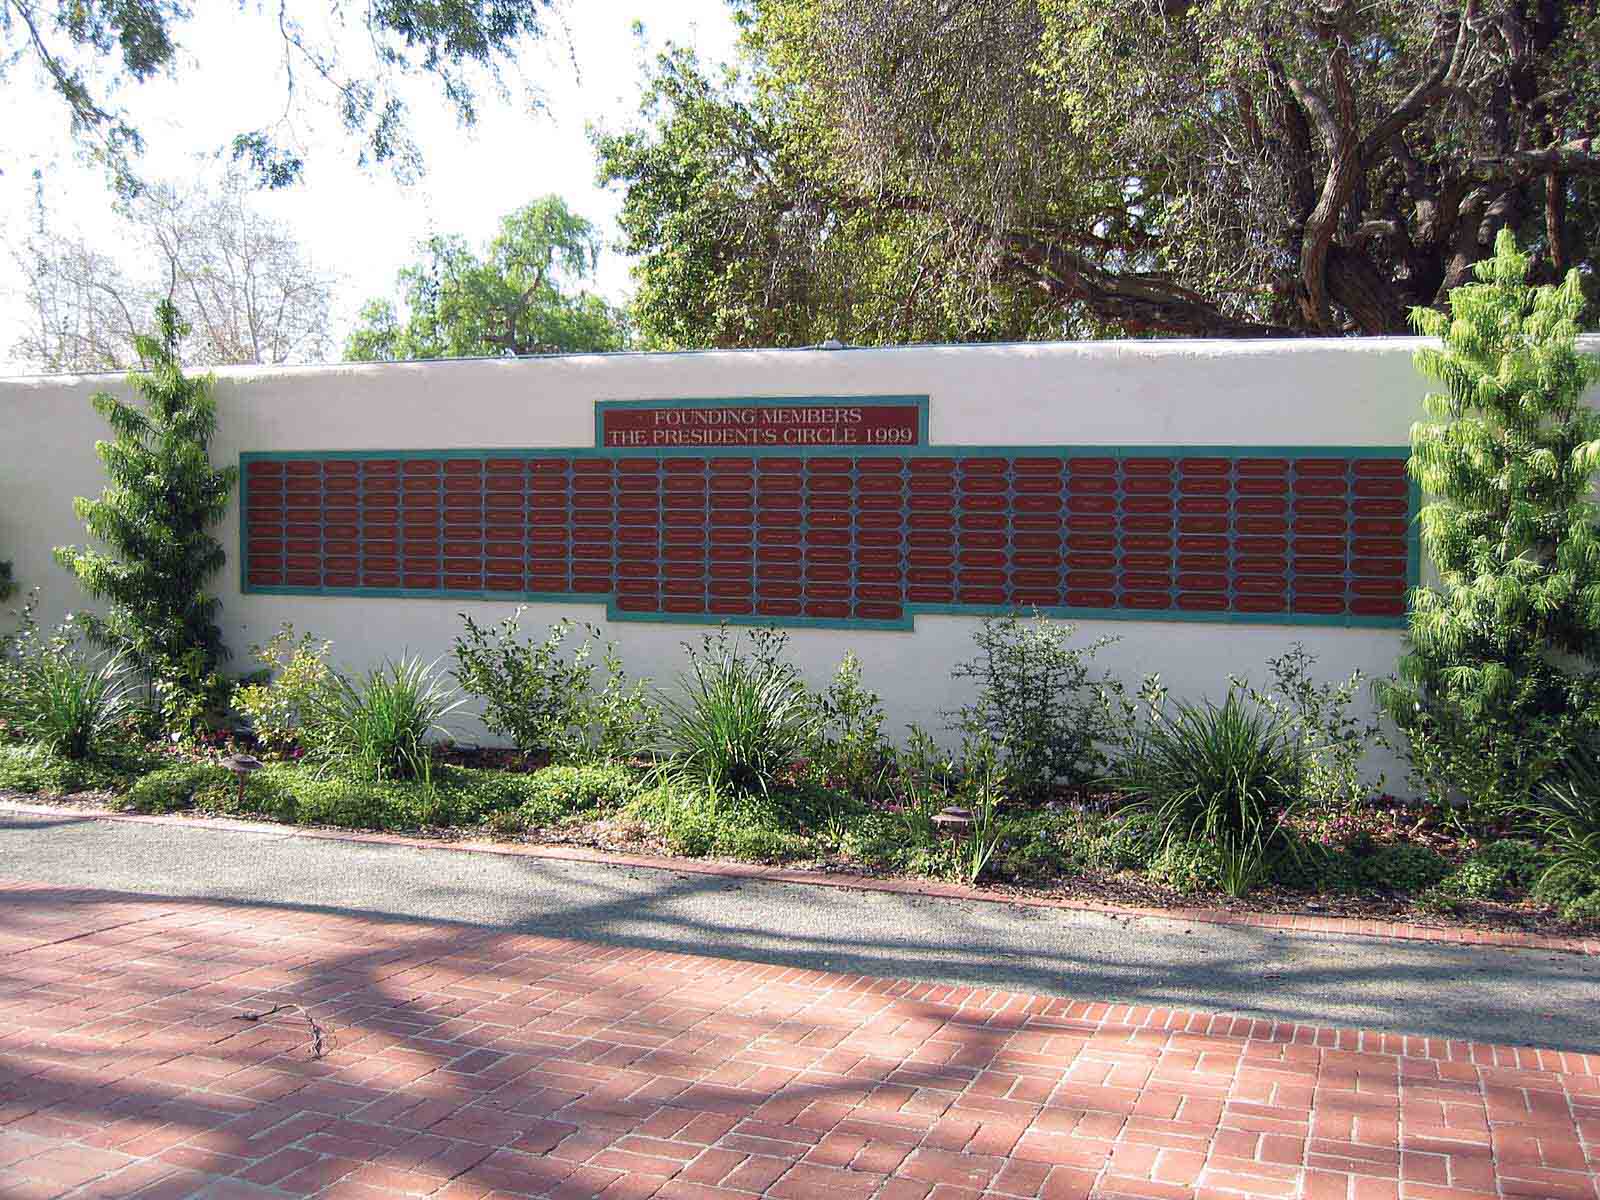 The President’s Circle founding members wall at CSUCI features dedicated tiles.